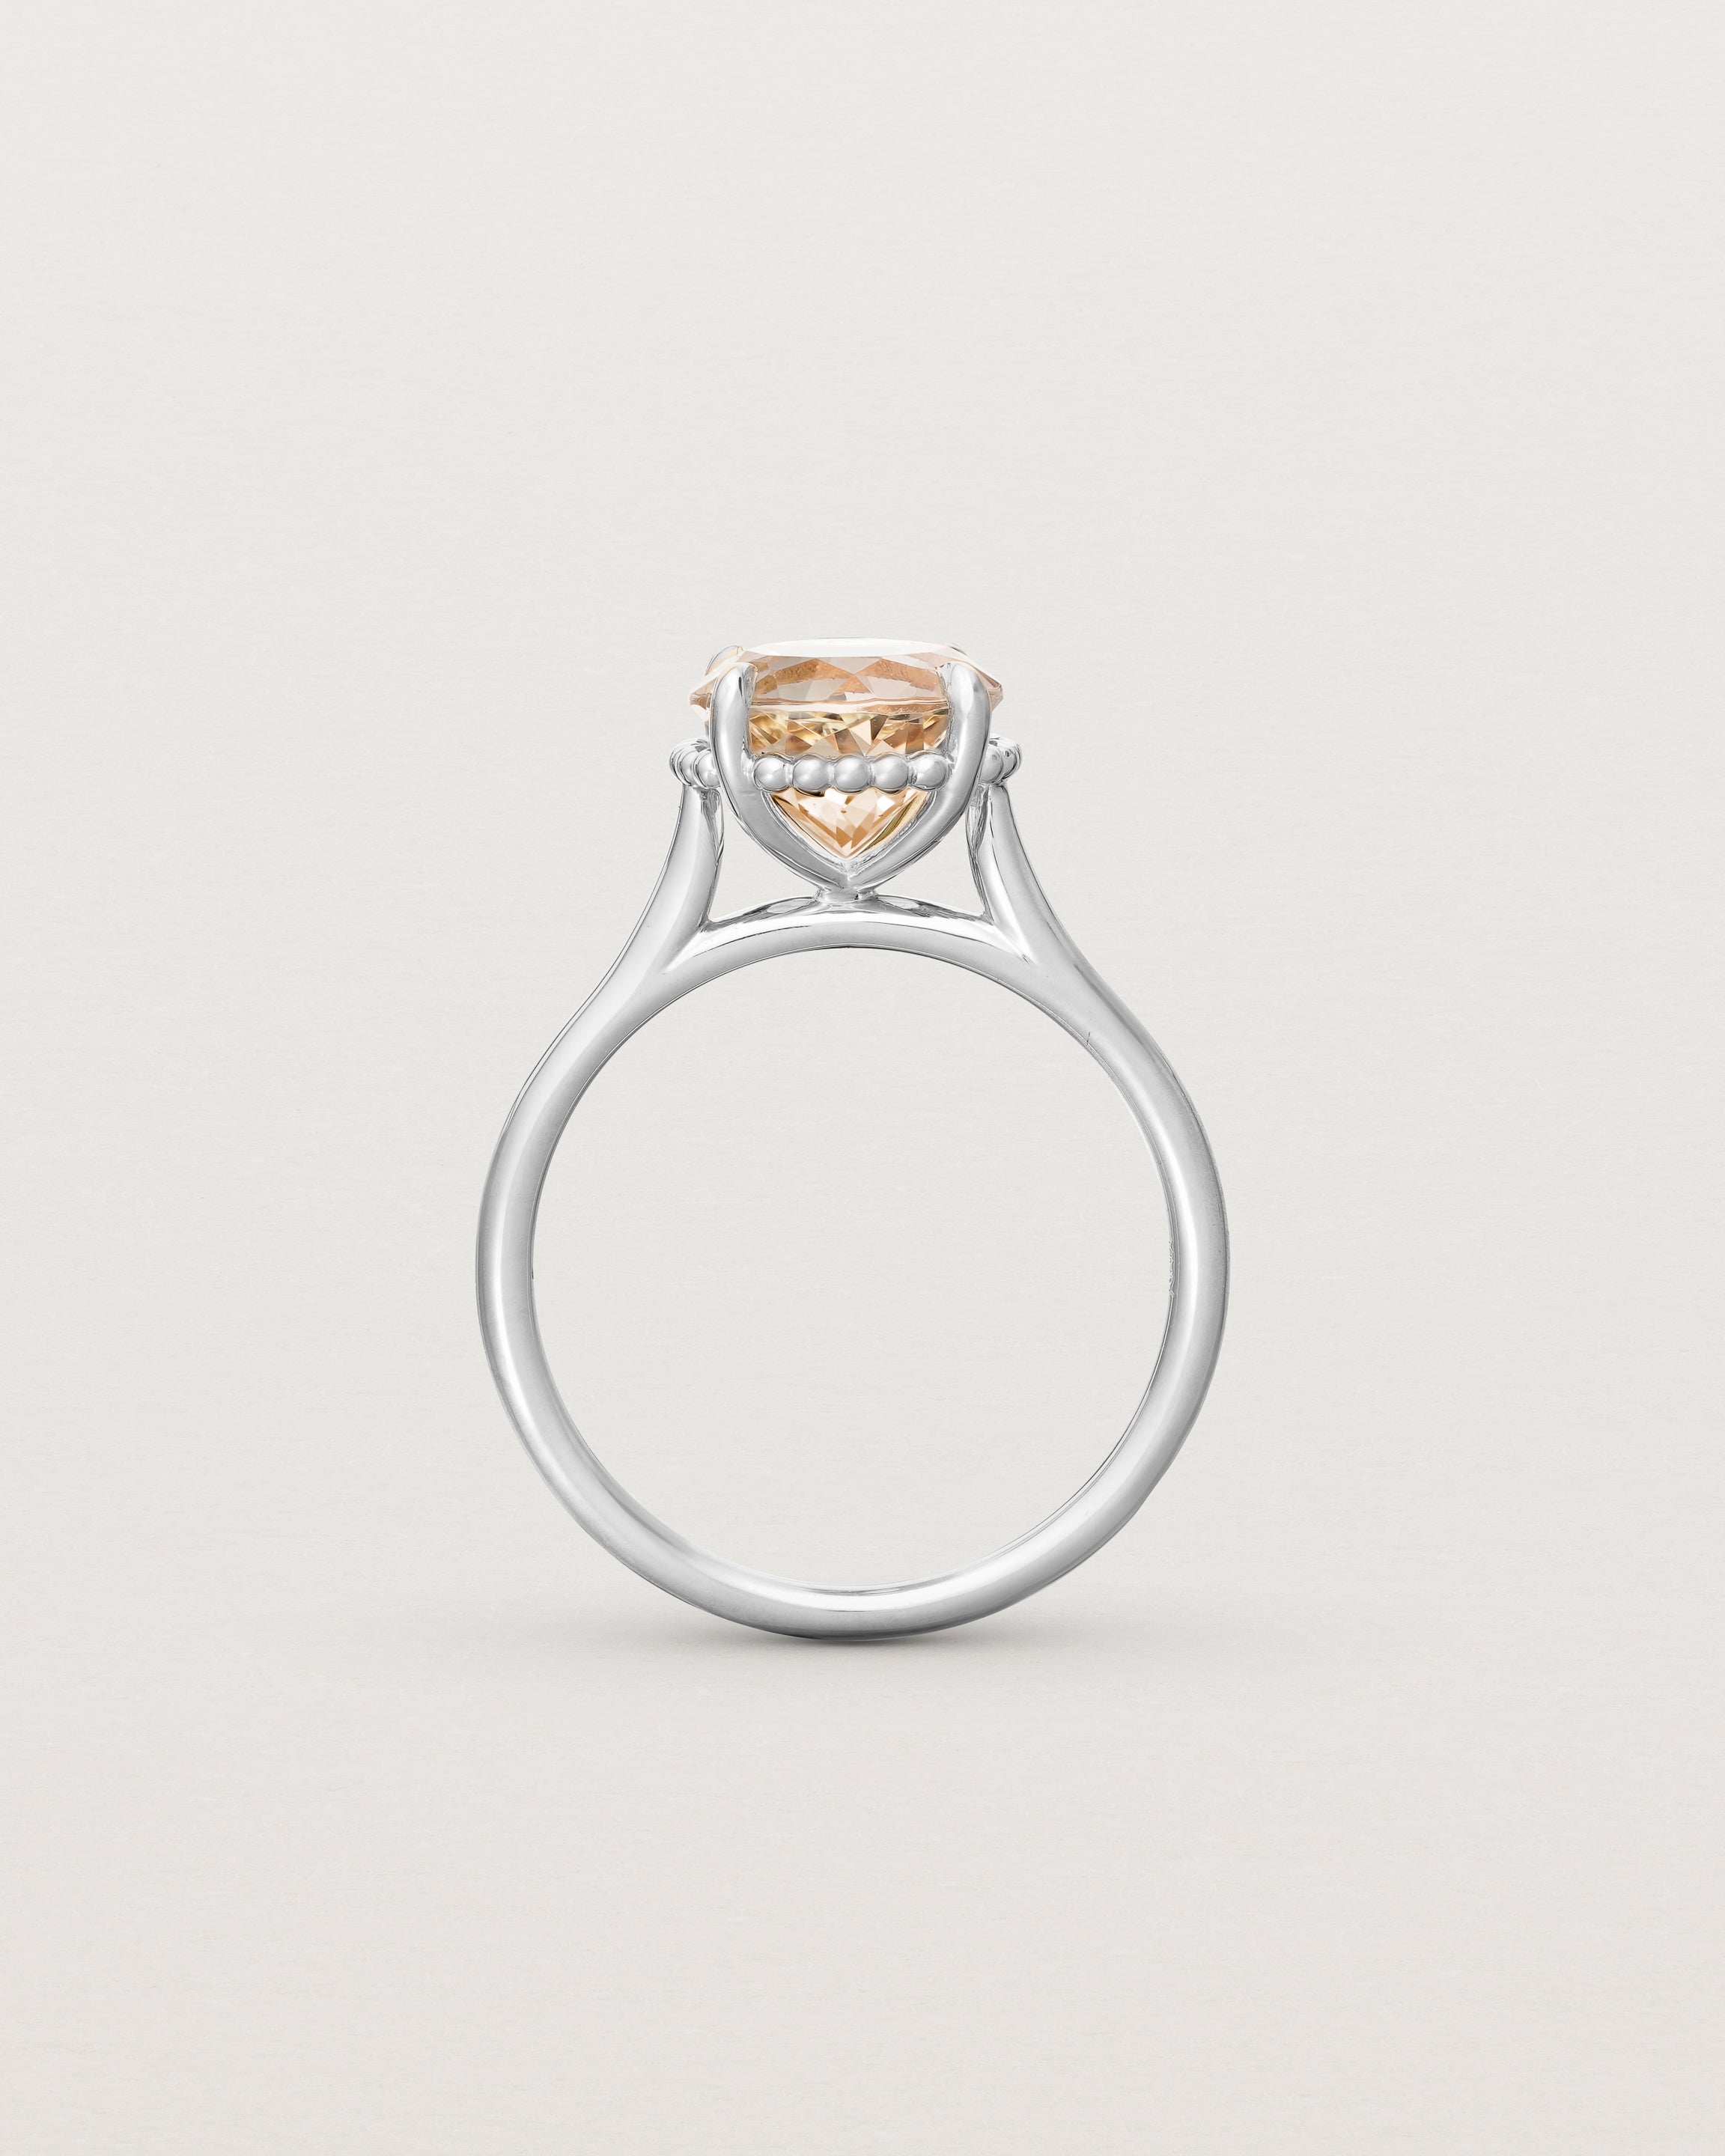 Standing view of the Thea Round Solitaire | Savannah Sunstone in white gold.